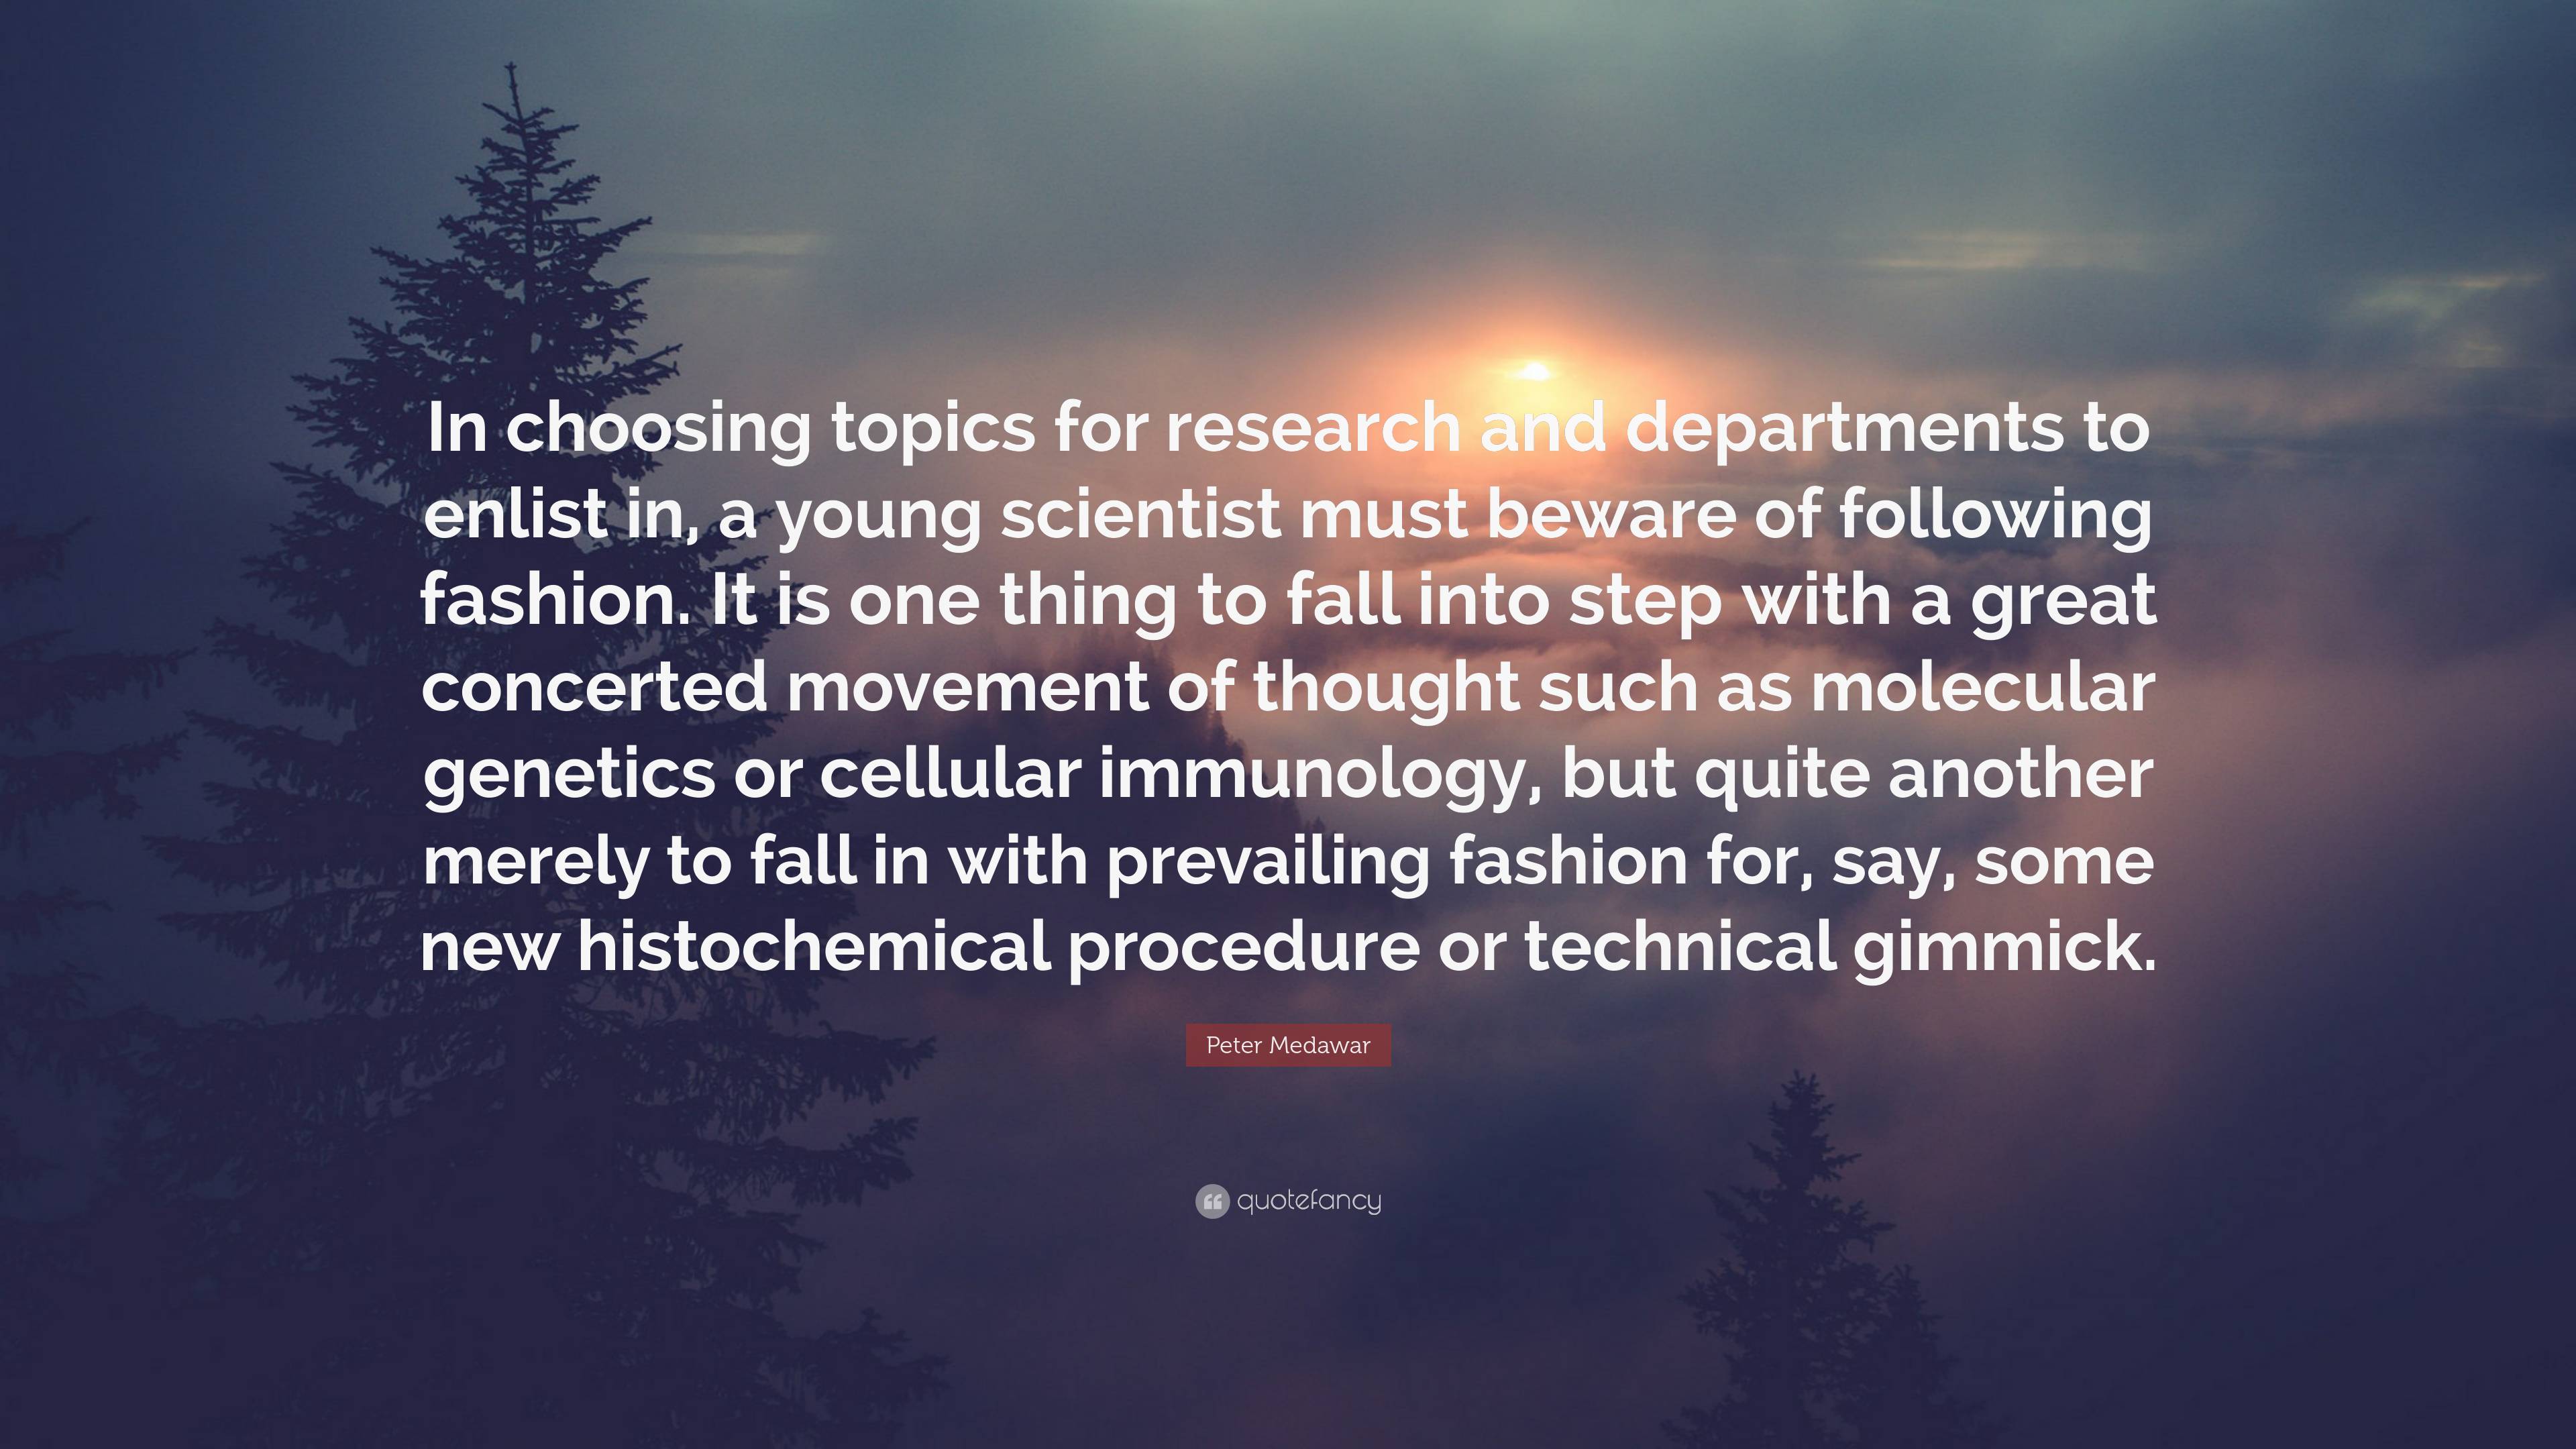 Peter Medawar Quote: “In choosing topics for research and departments to enlist in, a young scientist must beware of following fashion. It is .” (2 wallpaper)